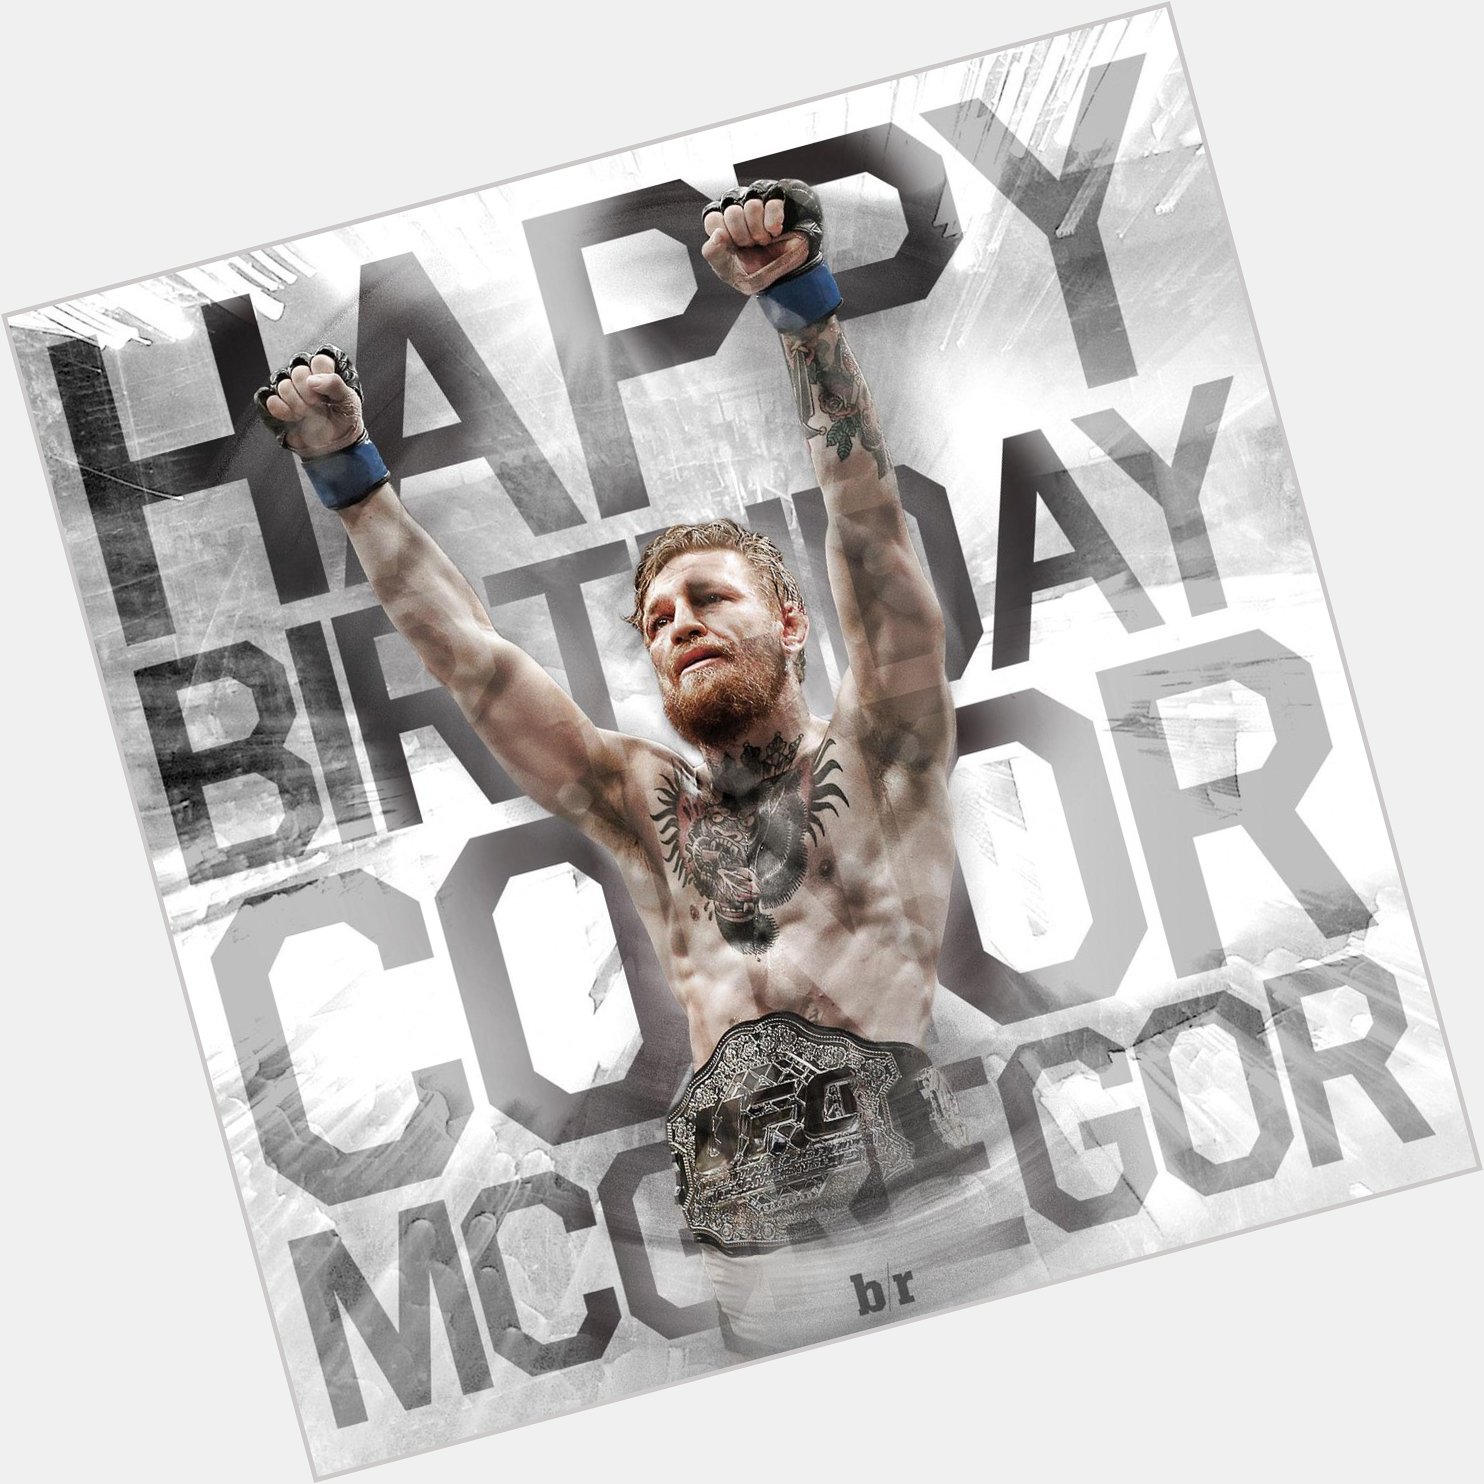 Happy birthday to the Conor McGregor, who turns 27 today. 